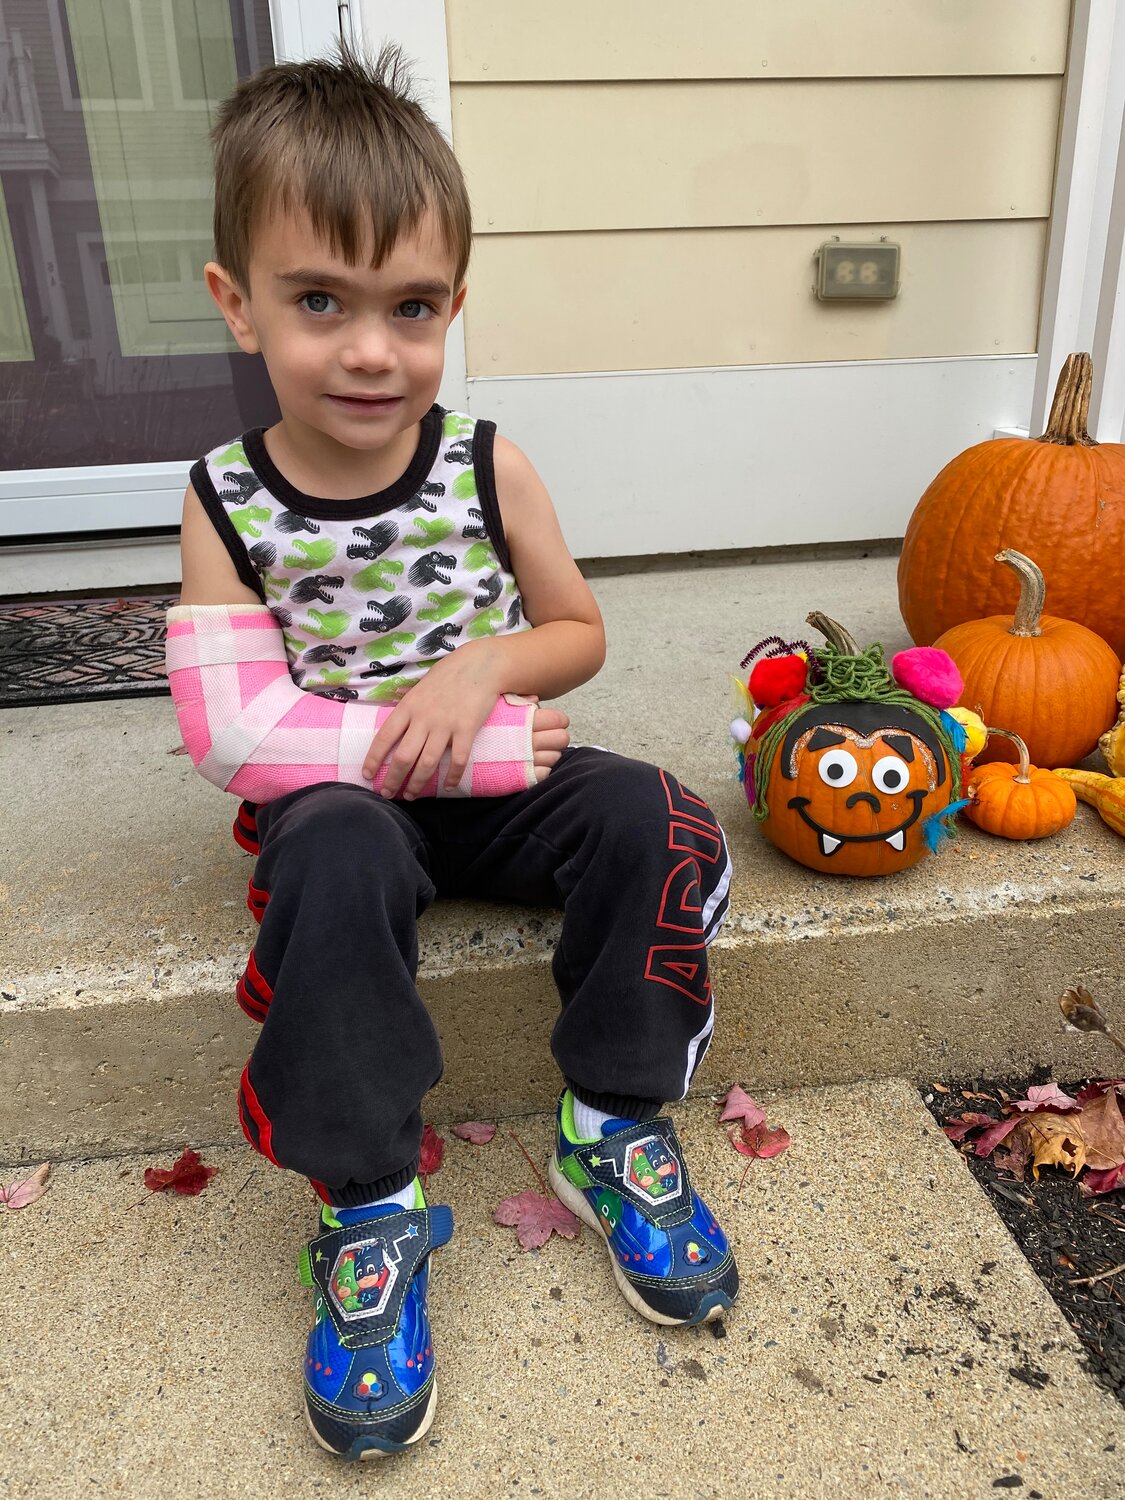 A shout out to James, age four, who "didn't let a broken arm stop him from decorating his vampire pumpkin" in the Manchester Community Center Pumpkin Decorating Contest, which took a creative turn this year. 